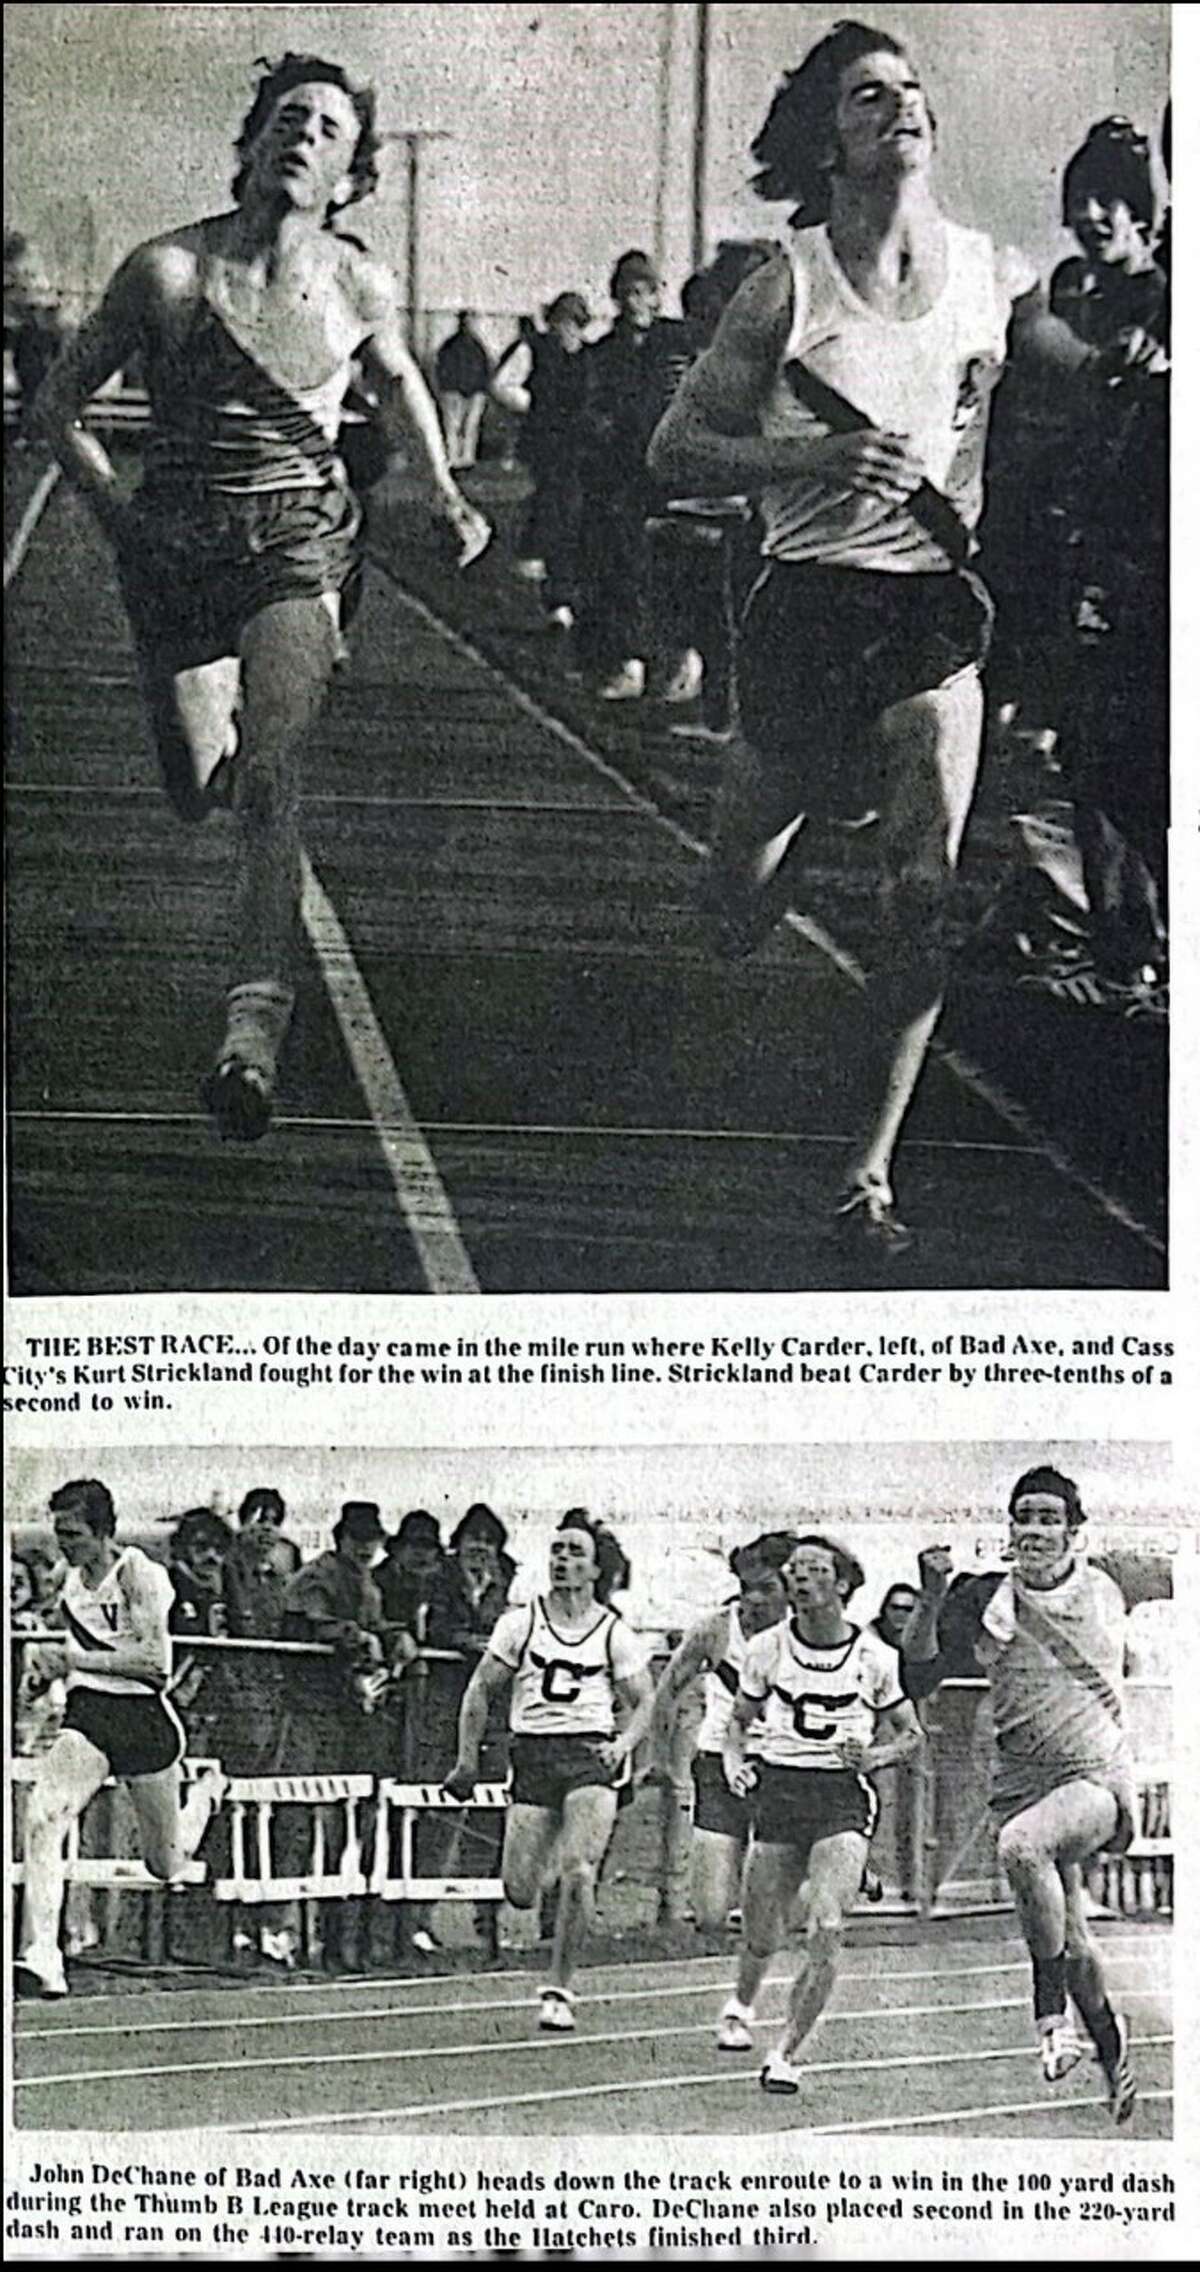 The first Tribune Meet of Champs was held in spring 1973.